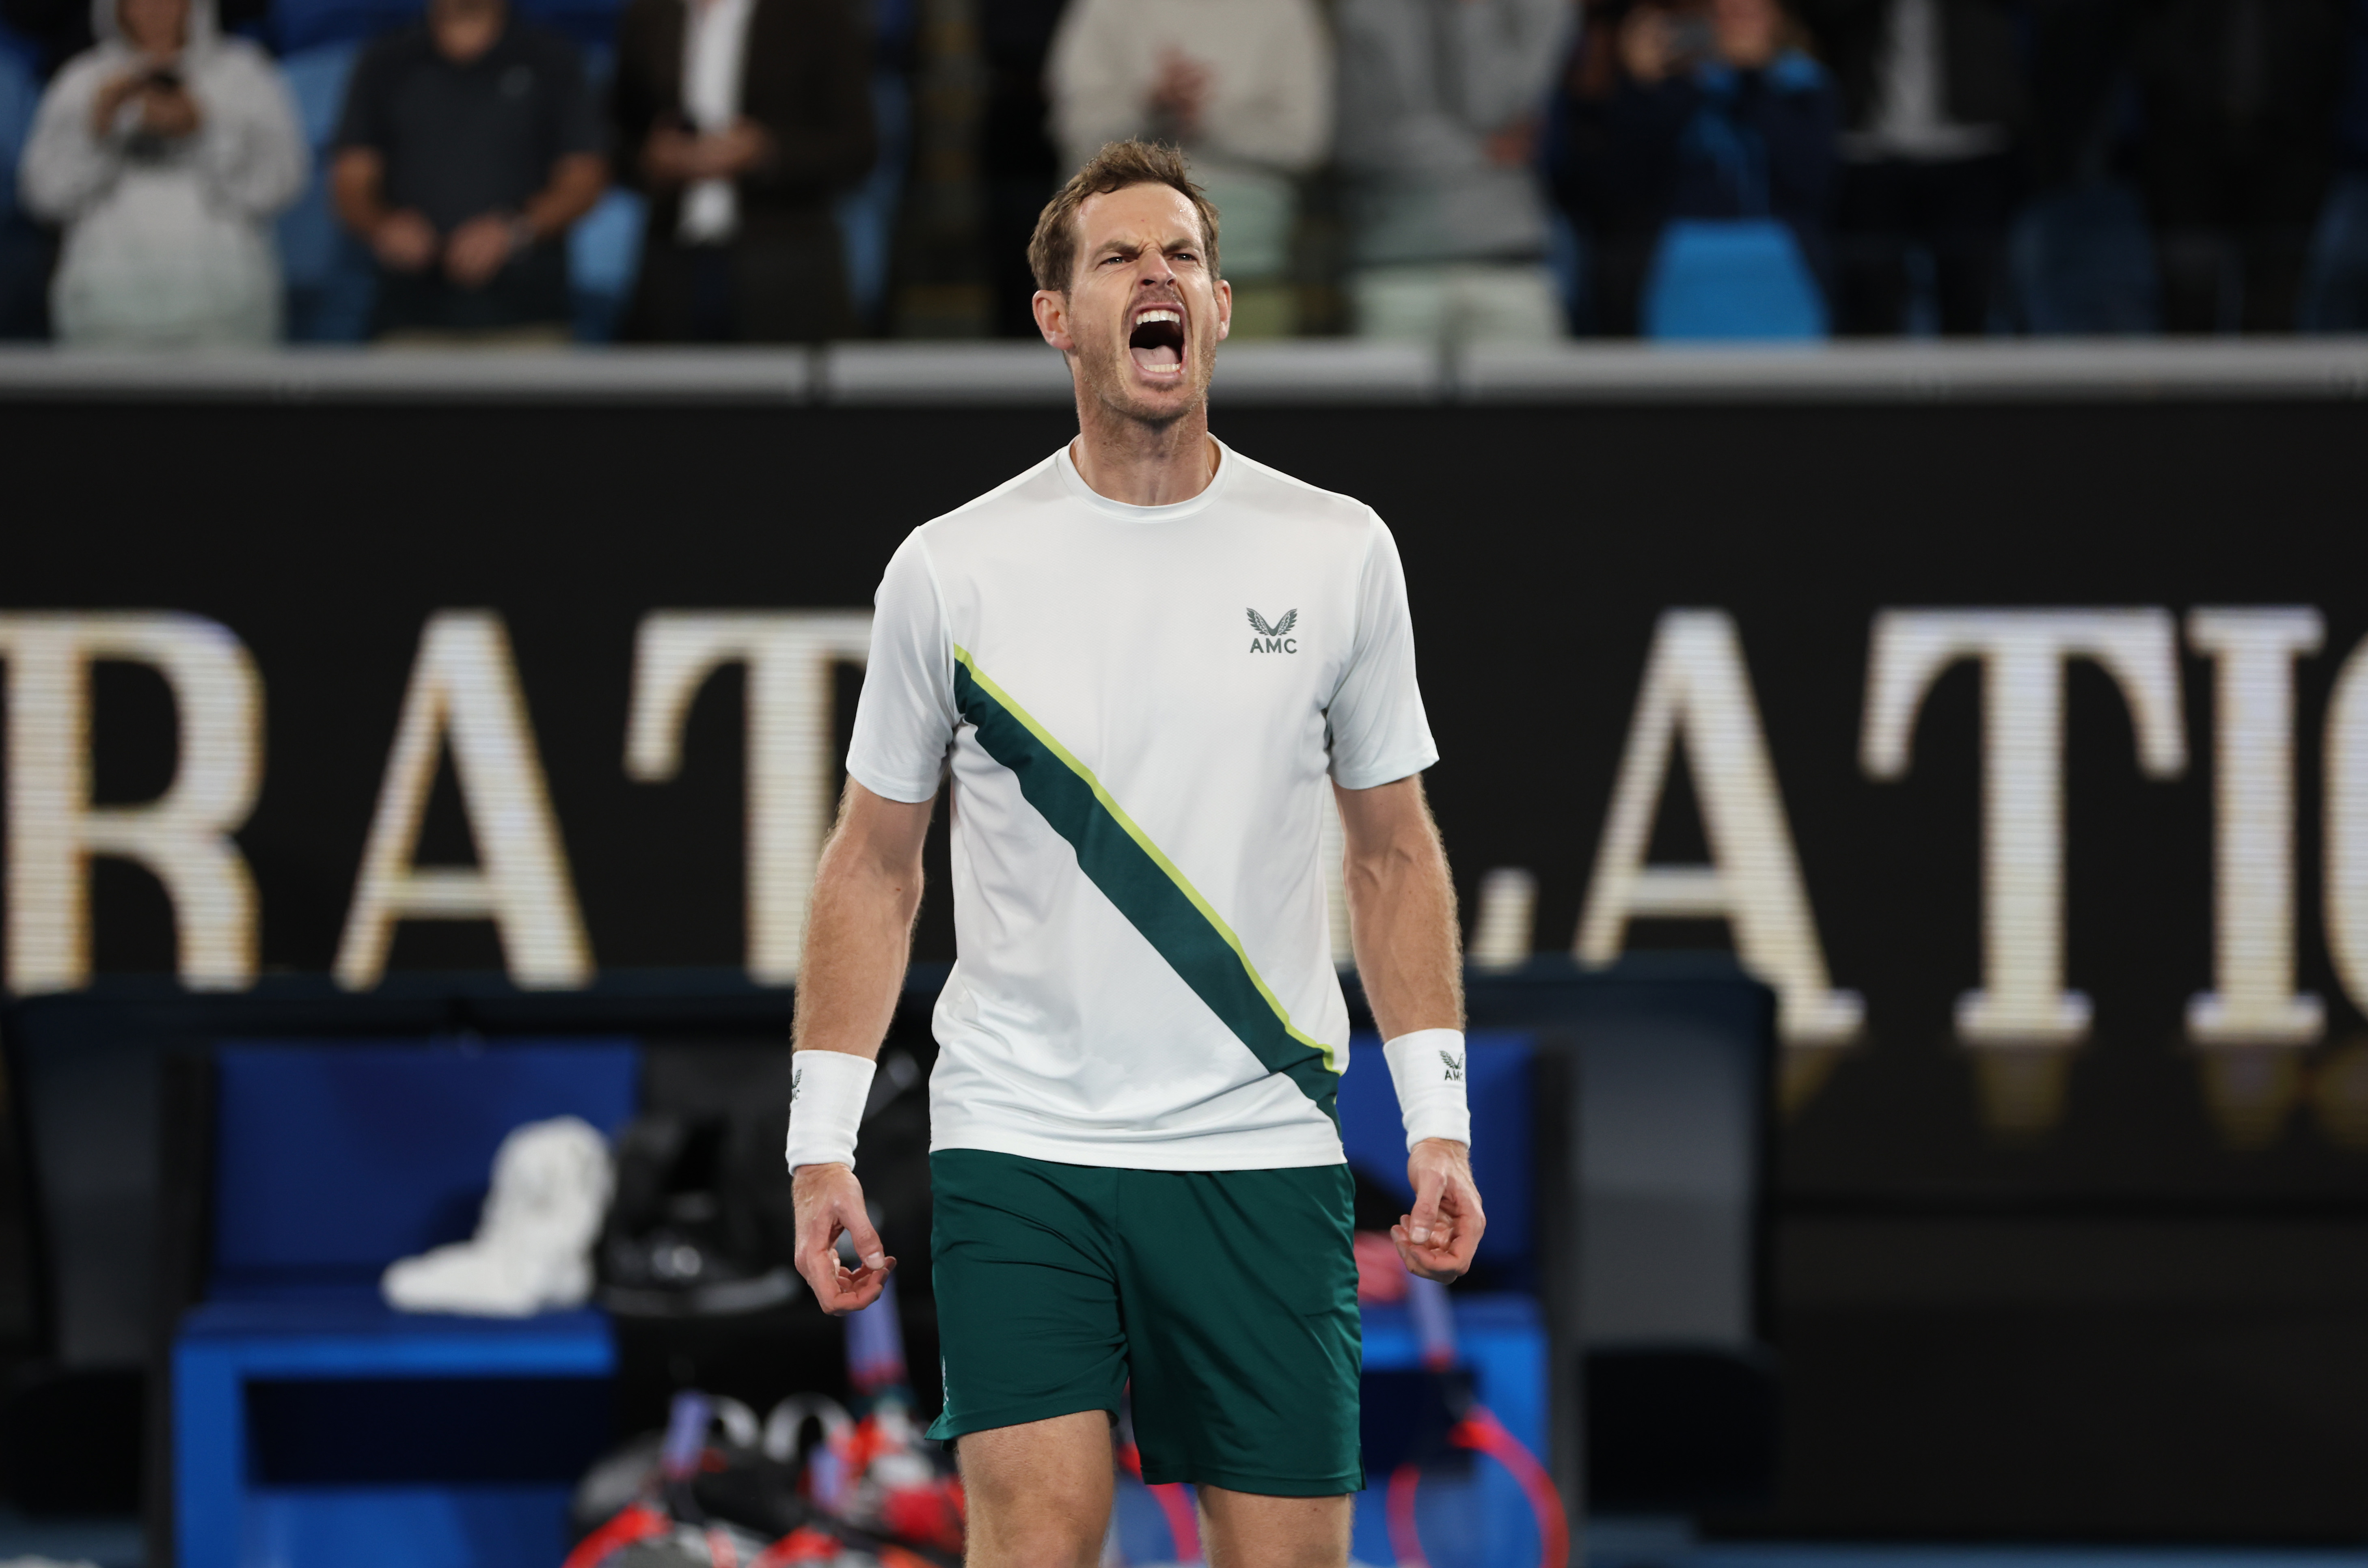 Andy Murray shows his